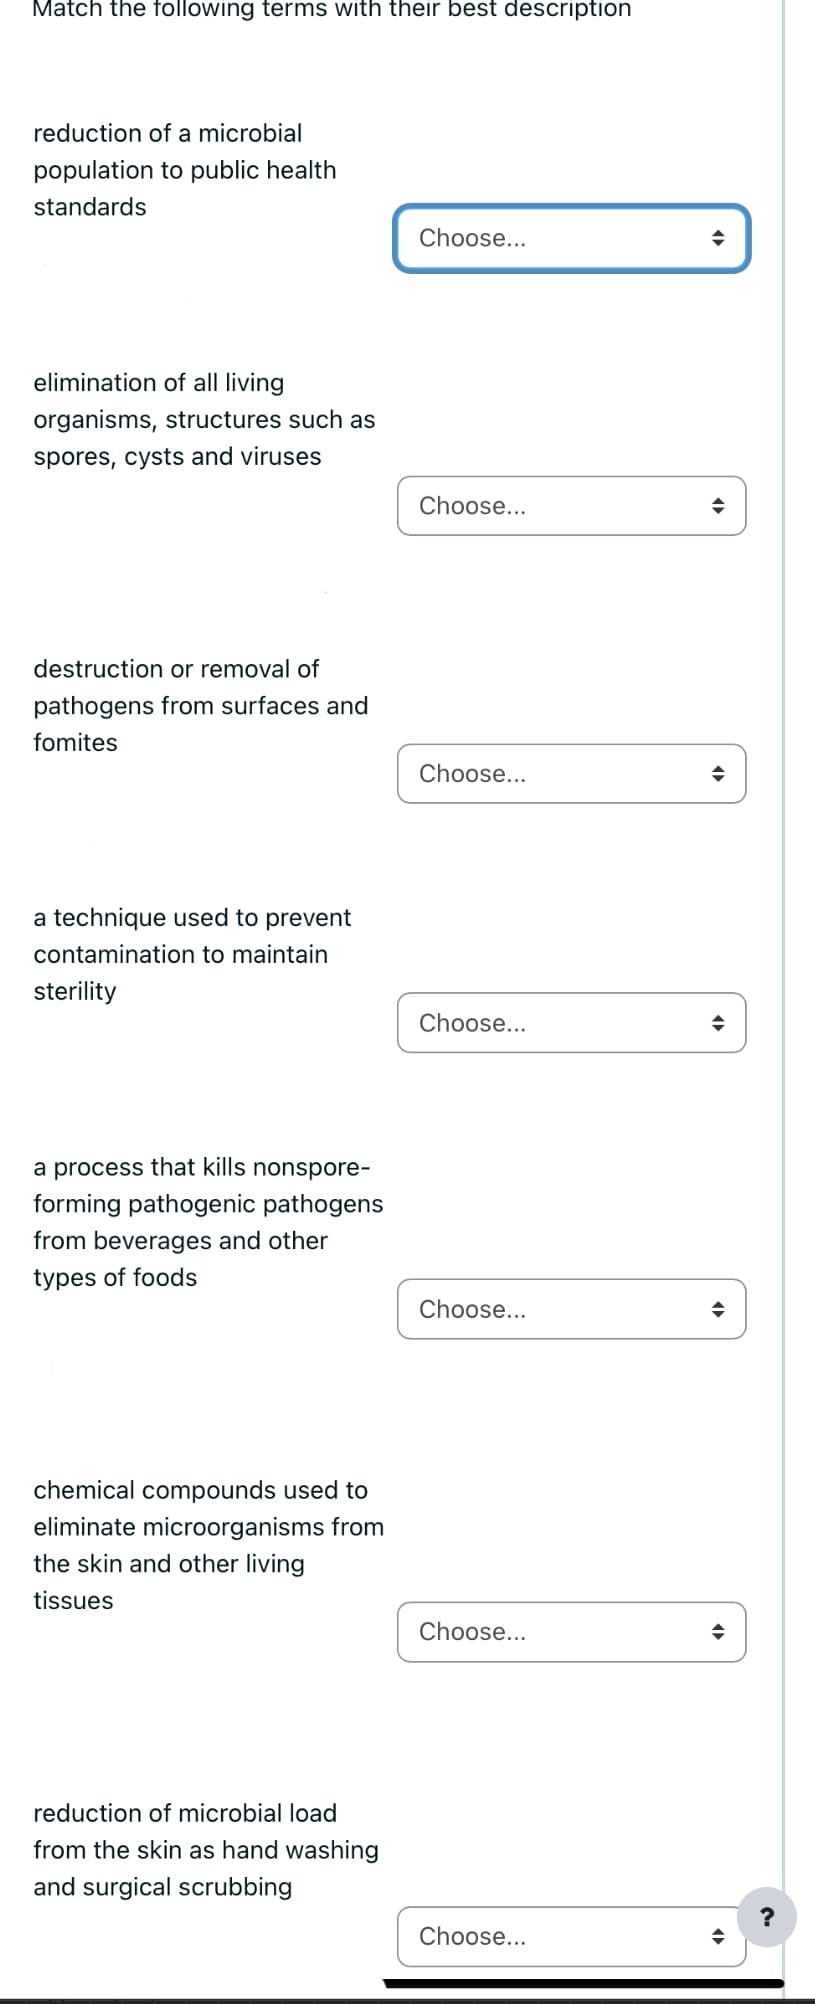 Match the following terms with their best description
reduction of a microbial
population to public health
standards
elimination of all living
organisms, structures such as
spores, cysts and viruses
destruction or removal of
pathogens from surfaces and
fomites
a technique used to prevent
contamination to maintain
sterility
a process that kills nonspore-
forming pathogenic pathogens
from beverages and other
types of foods
chemical compounds used to
eliminate microorganisms from
the skin and other living
tissues
reduction of microbial load
from the skin as hand washing
and surgical scrubbing
Choose...
Choose...
Choose...
Choose...
Choose...
Choose...
Choose...
◆
◆
◆
◆
?